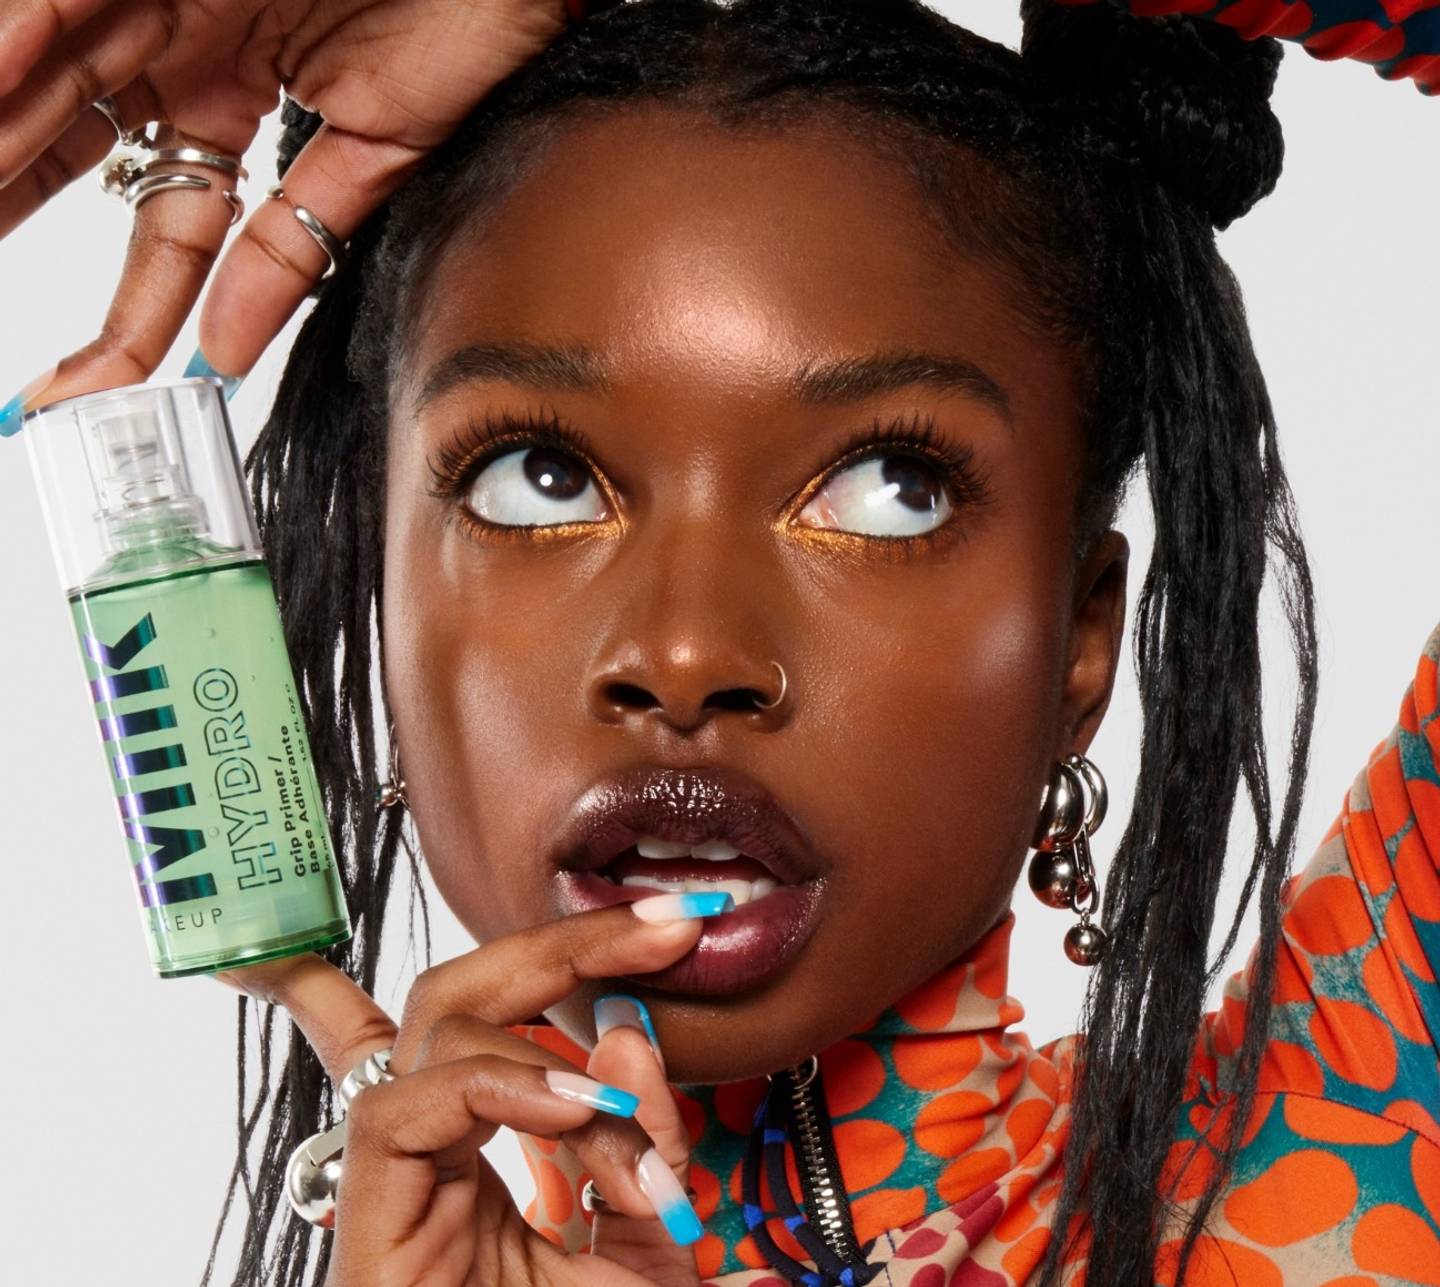 Model in a colorful outfit holds a bottle of Milk Makeup Hydro Grip Primer near her face, against a white background